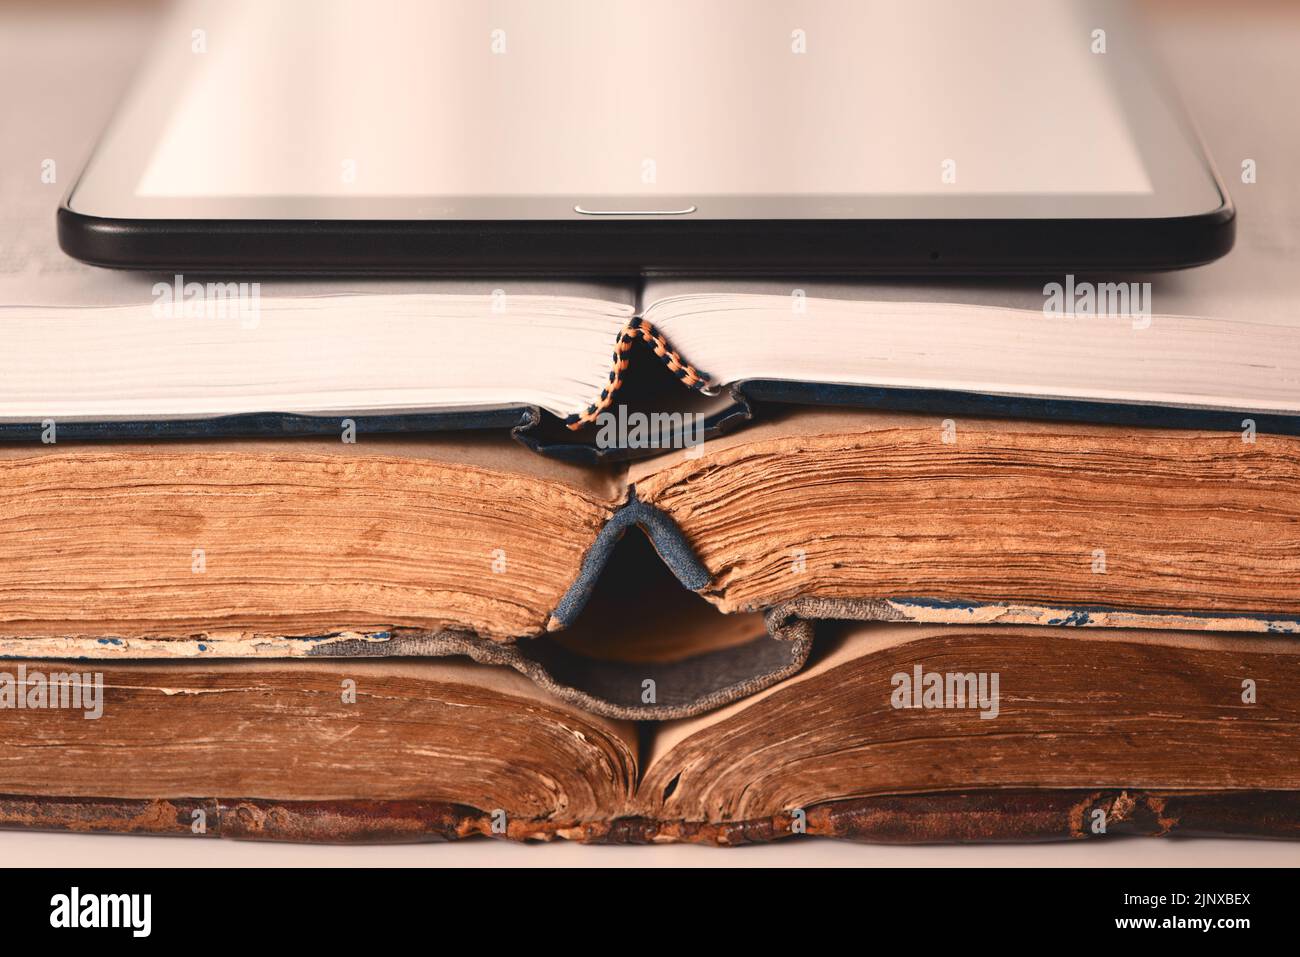 Open pages of old shabby brown and new books, digital tablet. Concept of choice between new technologies and old books. Analog vs digital. Closeup Stock Photo